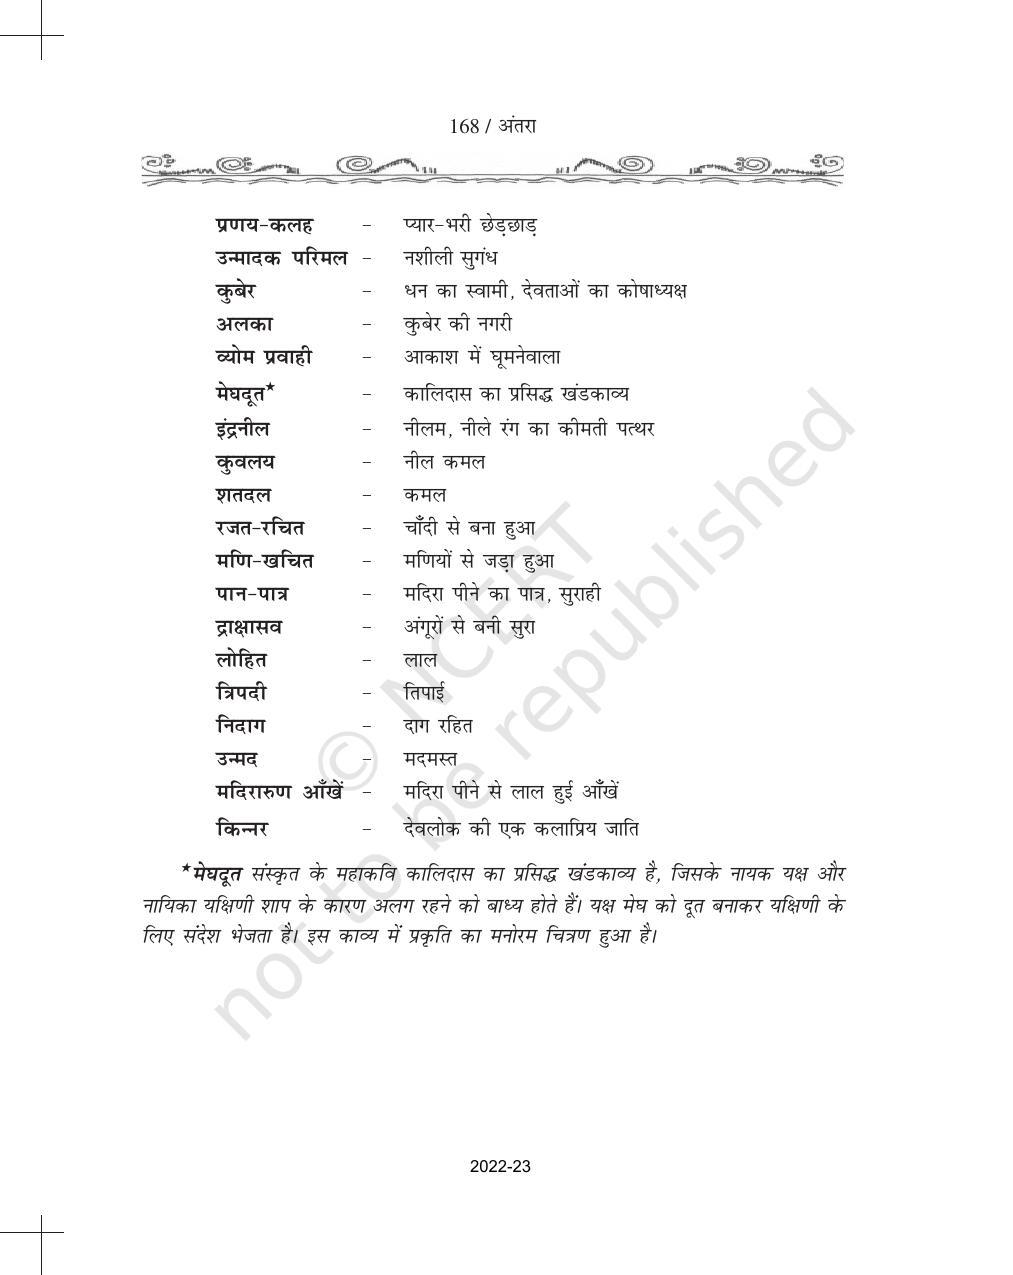 NCERT Book for Class 11 Hindi Antra Chapter 17 नागार्जुन - Page 8